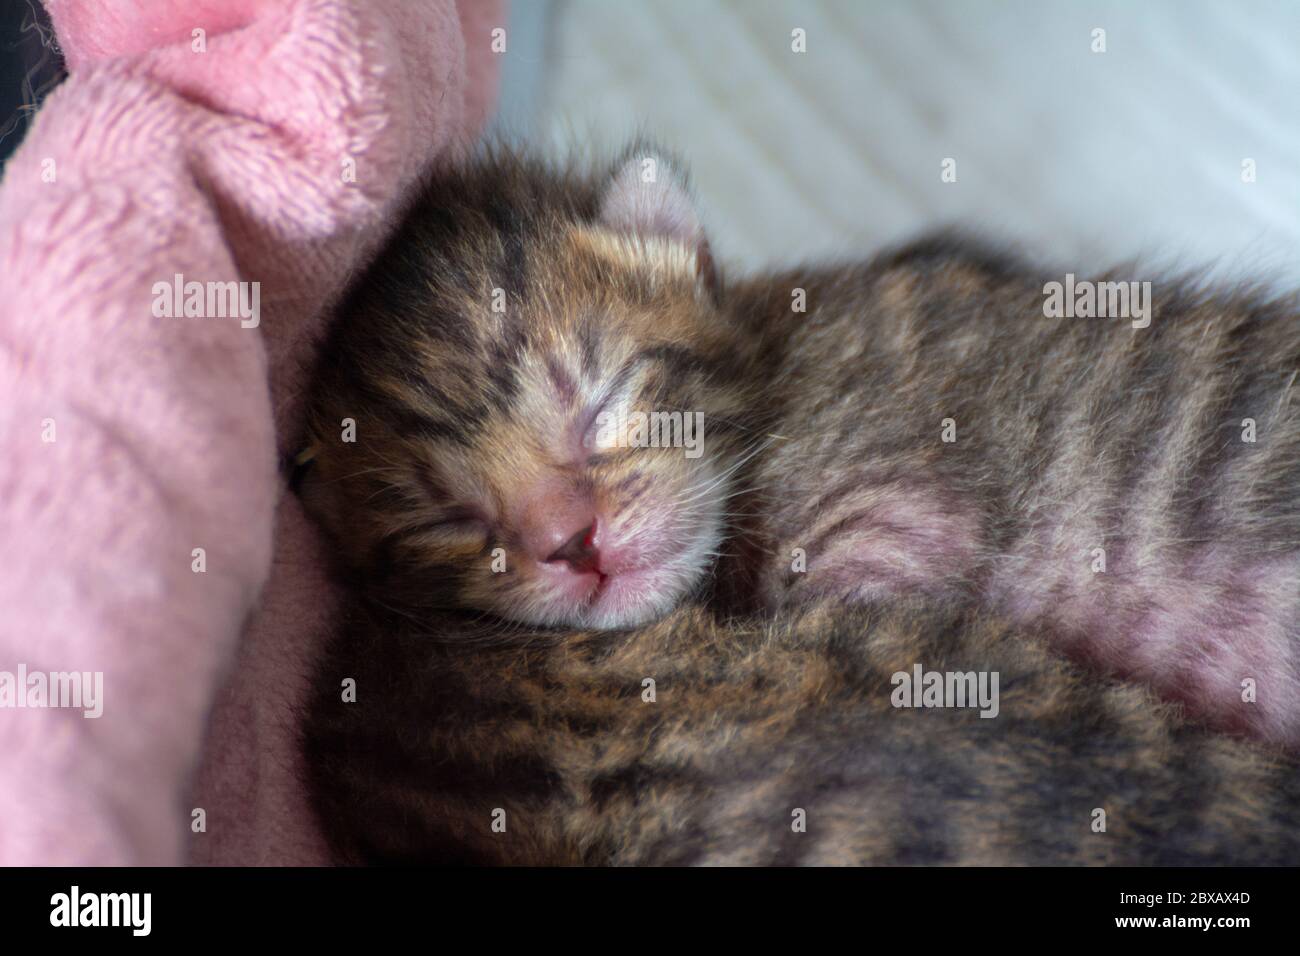 Newborn, adorable kittens suckling, playing and sleeping in their mother cat's fur Stock Photo